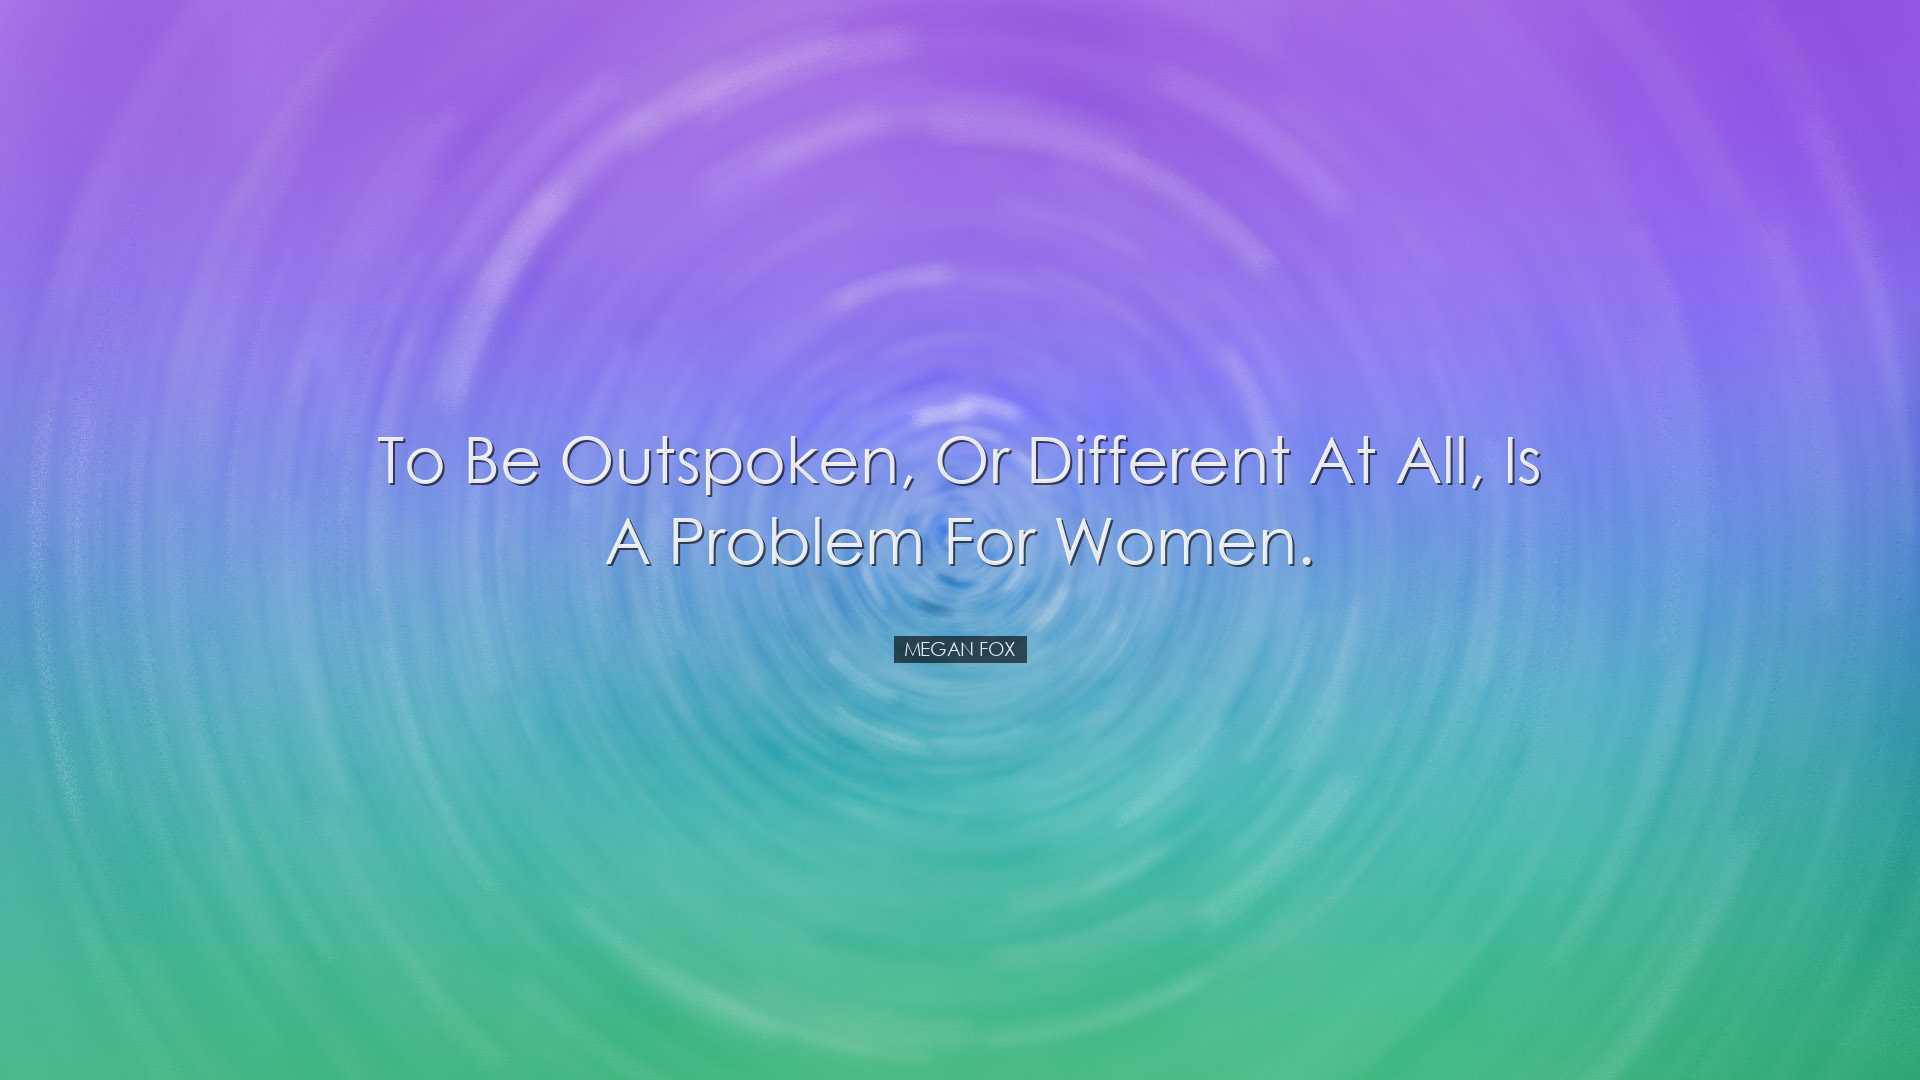 To be outspoken, or different at all, is a problem for women. - Me